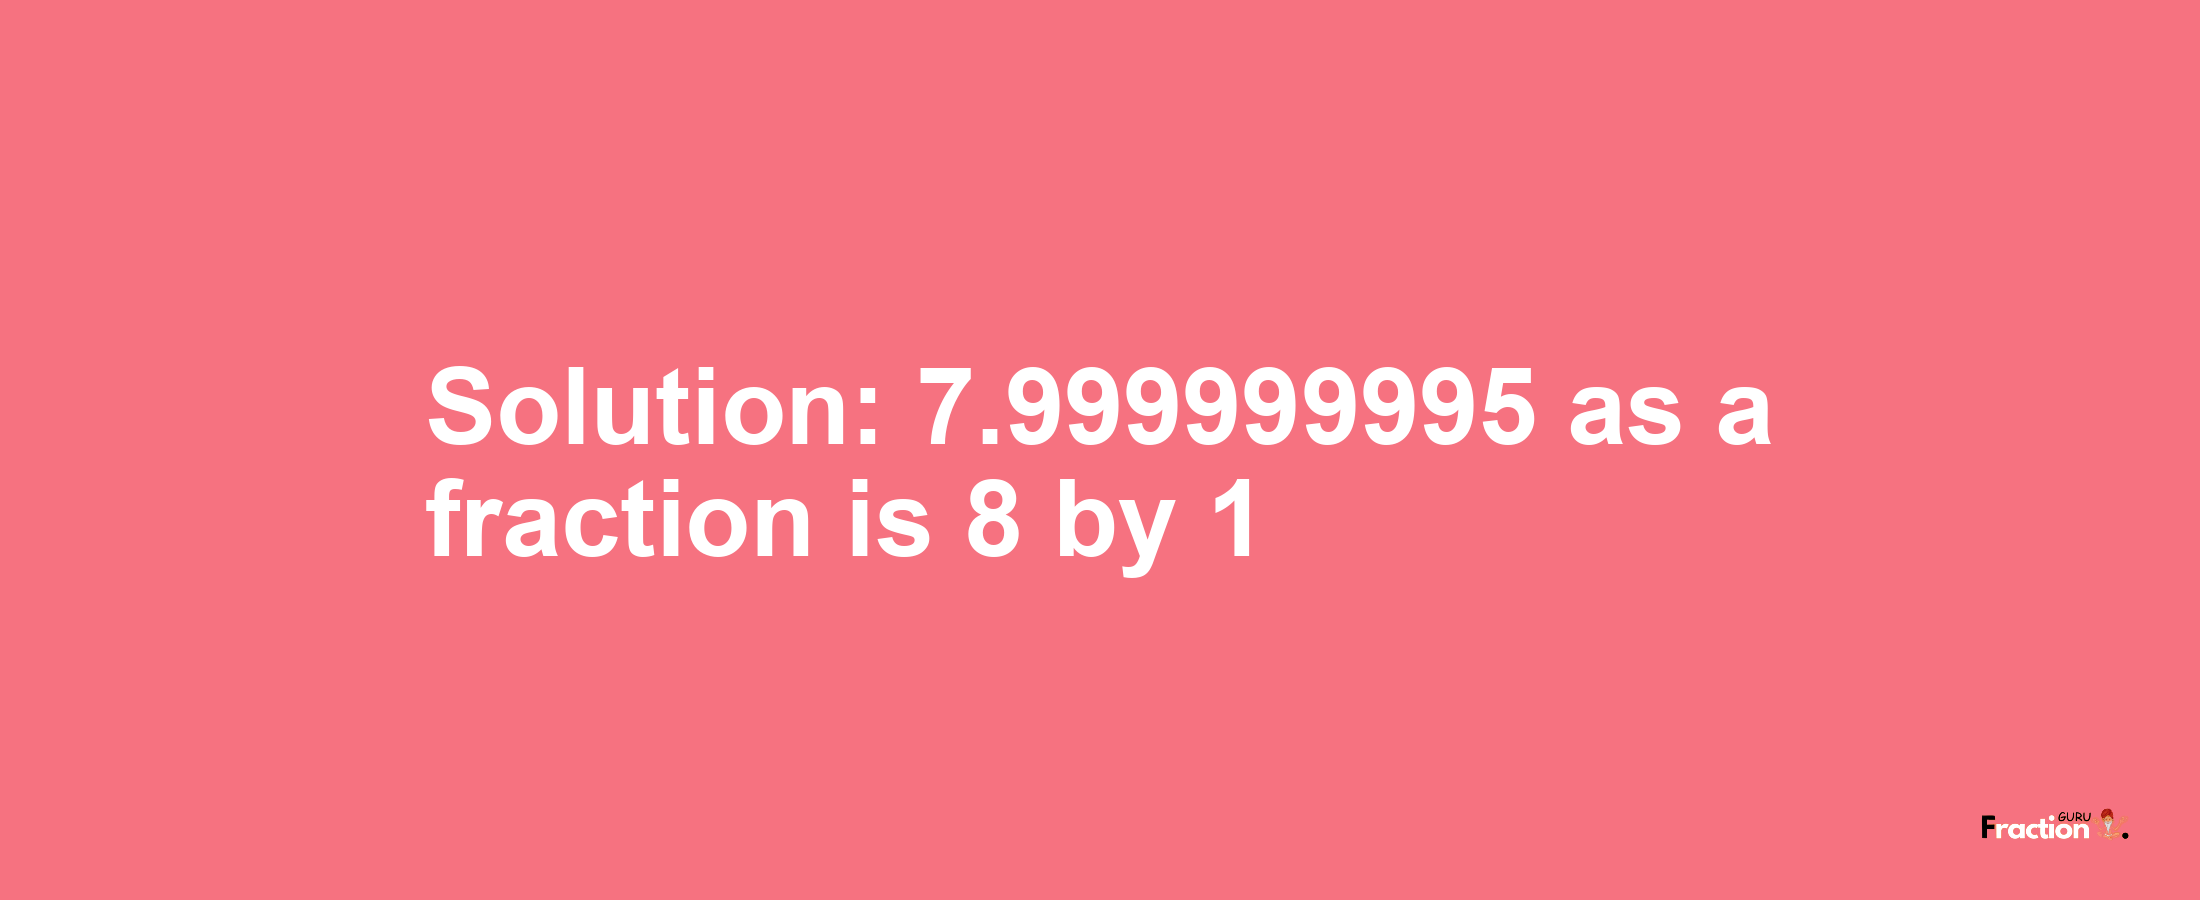 Solution:7.999999995 as a fraction is 8/1